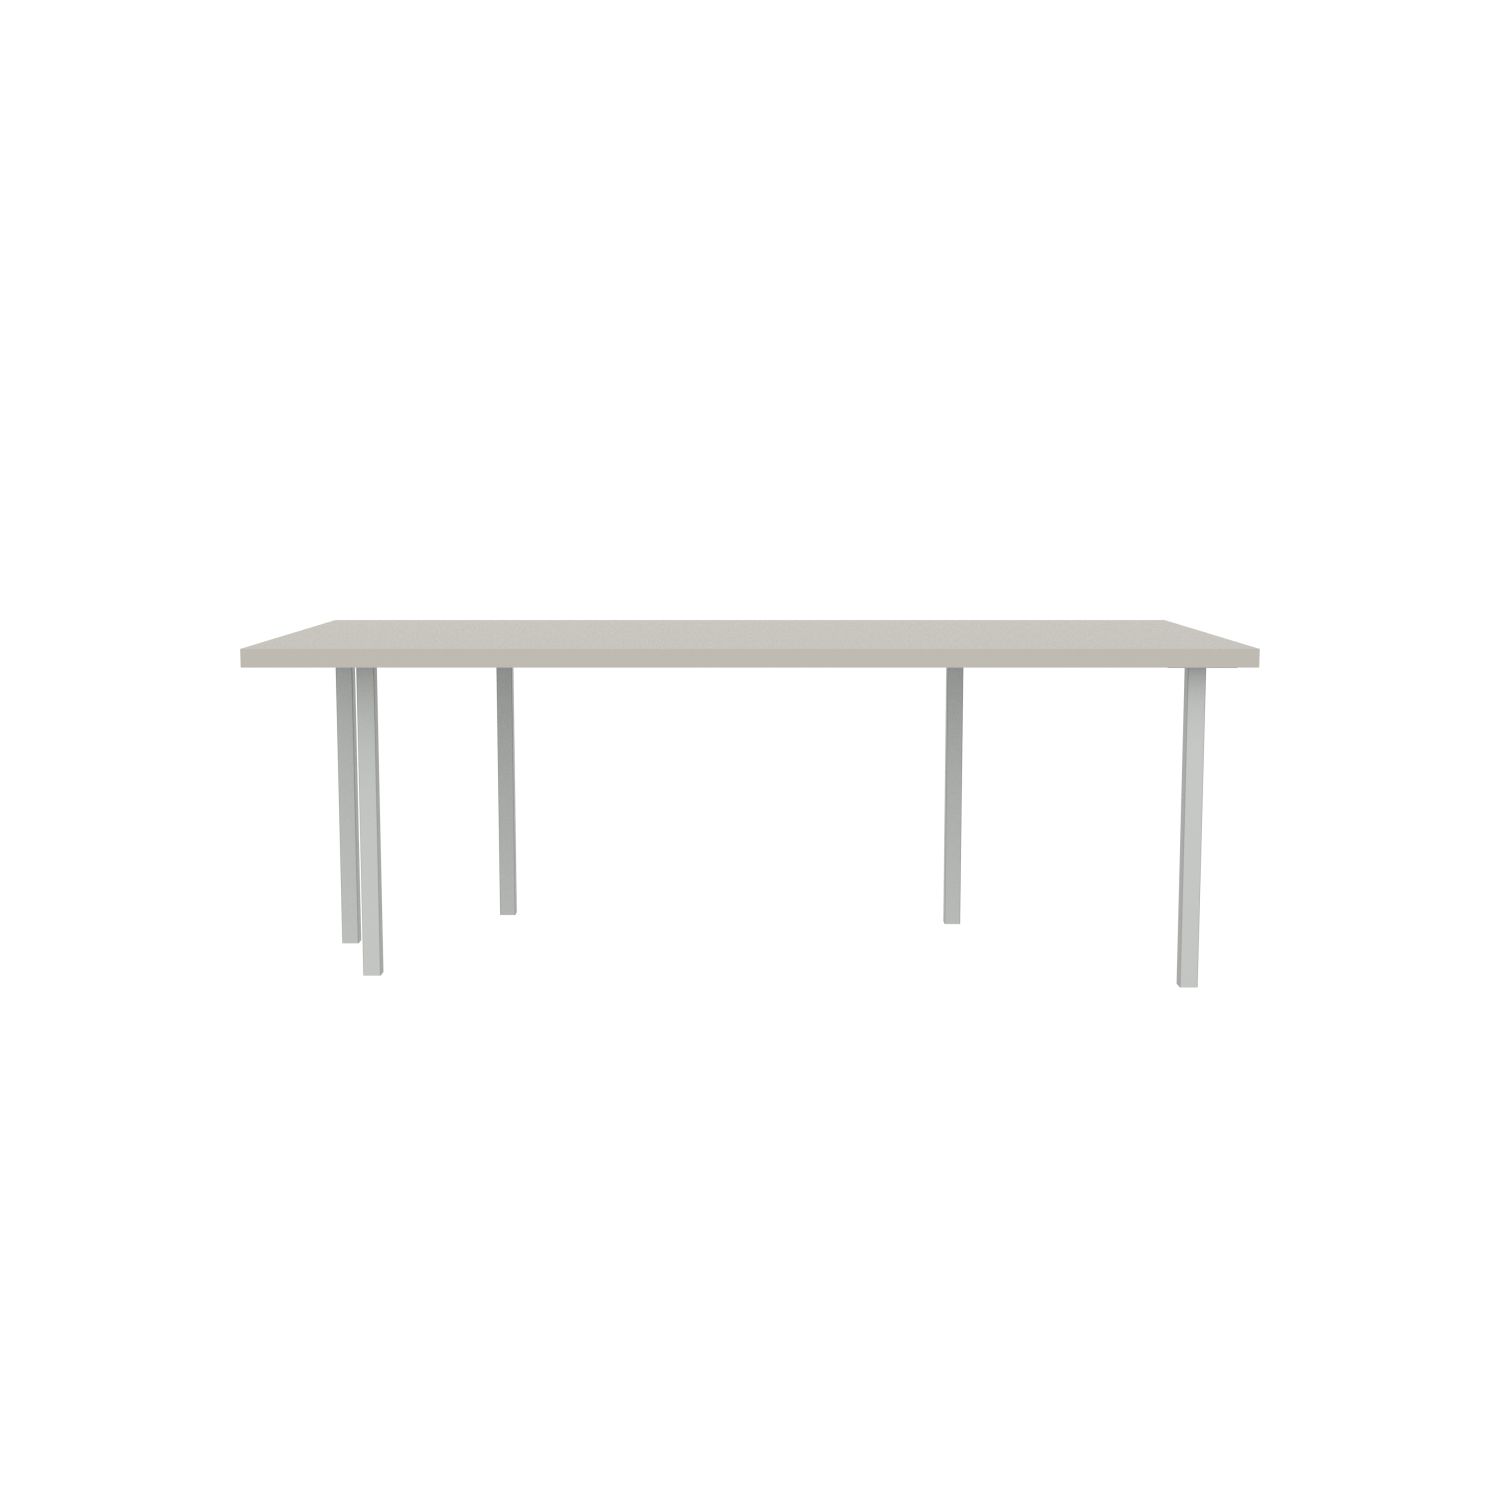 lensvelt bbrand table five fixed heigt 103x218 hpl white 50 mm price level 1 light grey ral7035